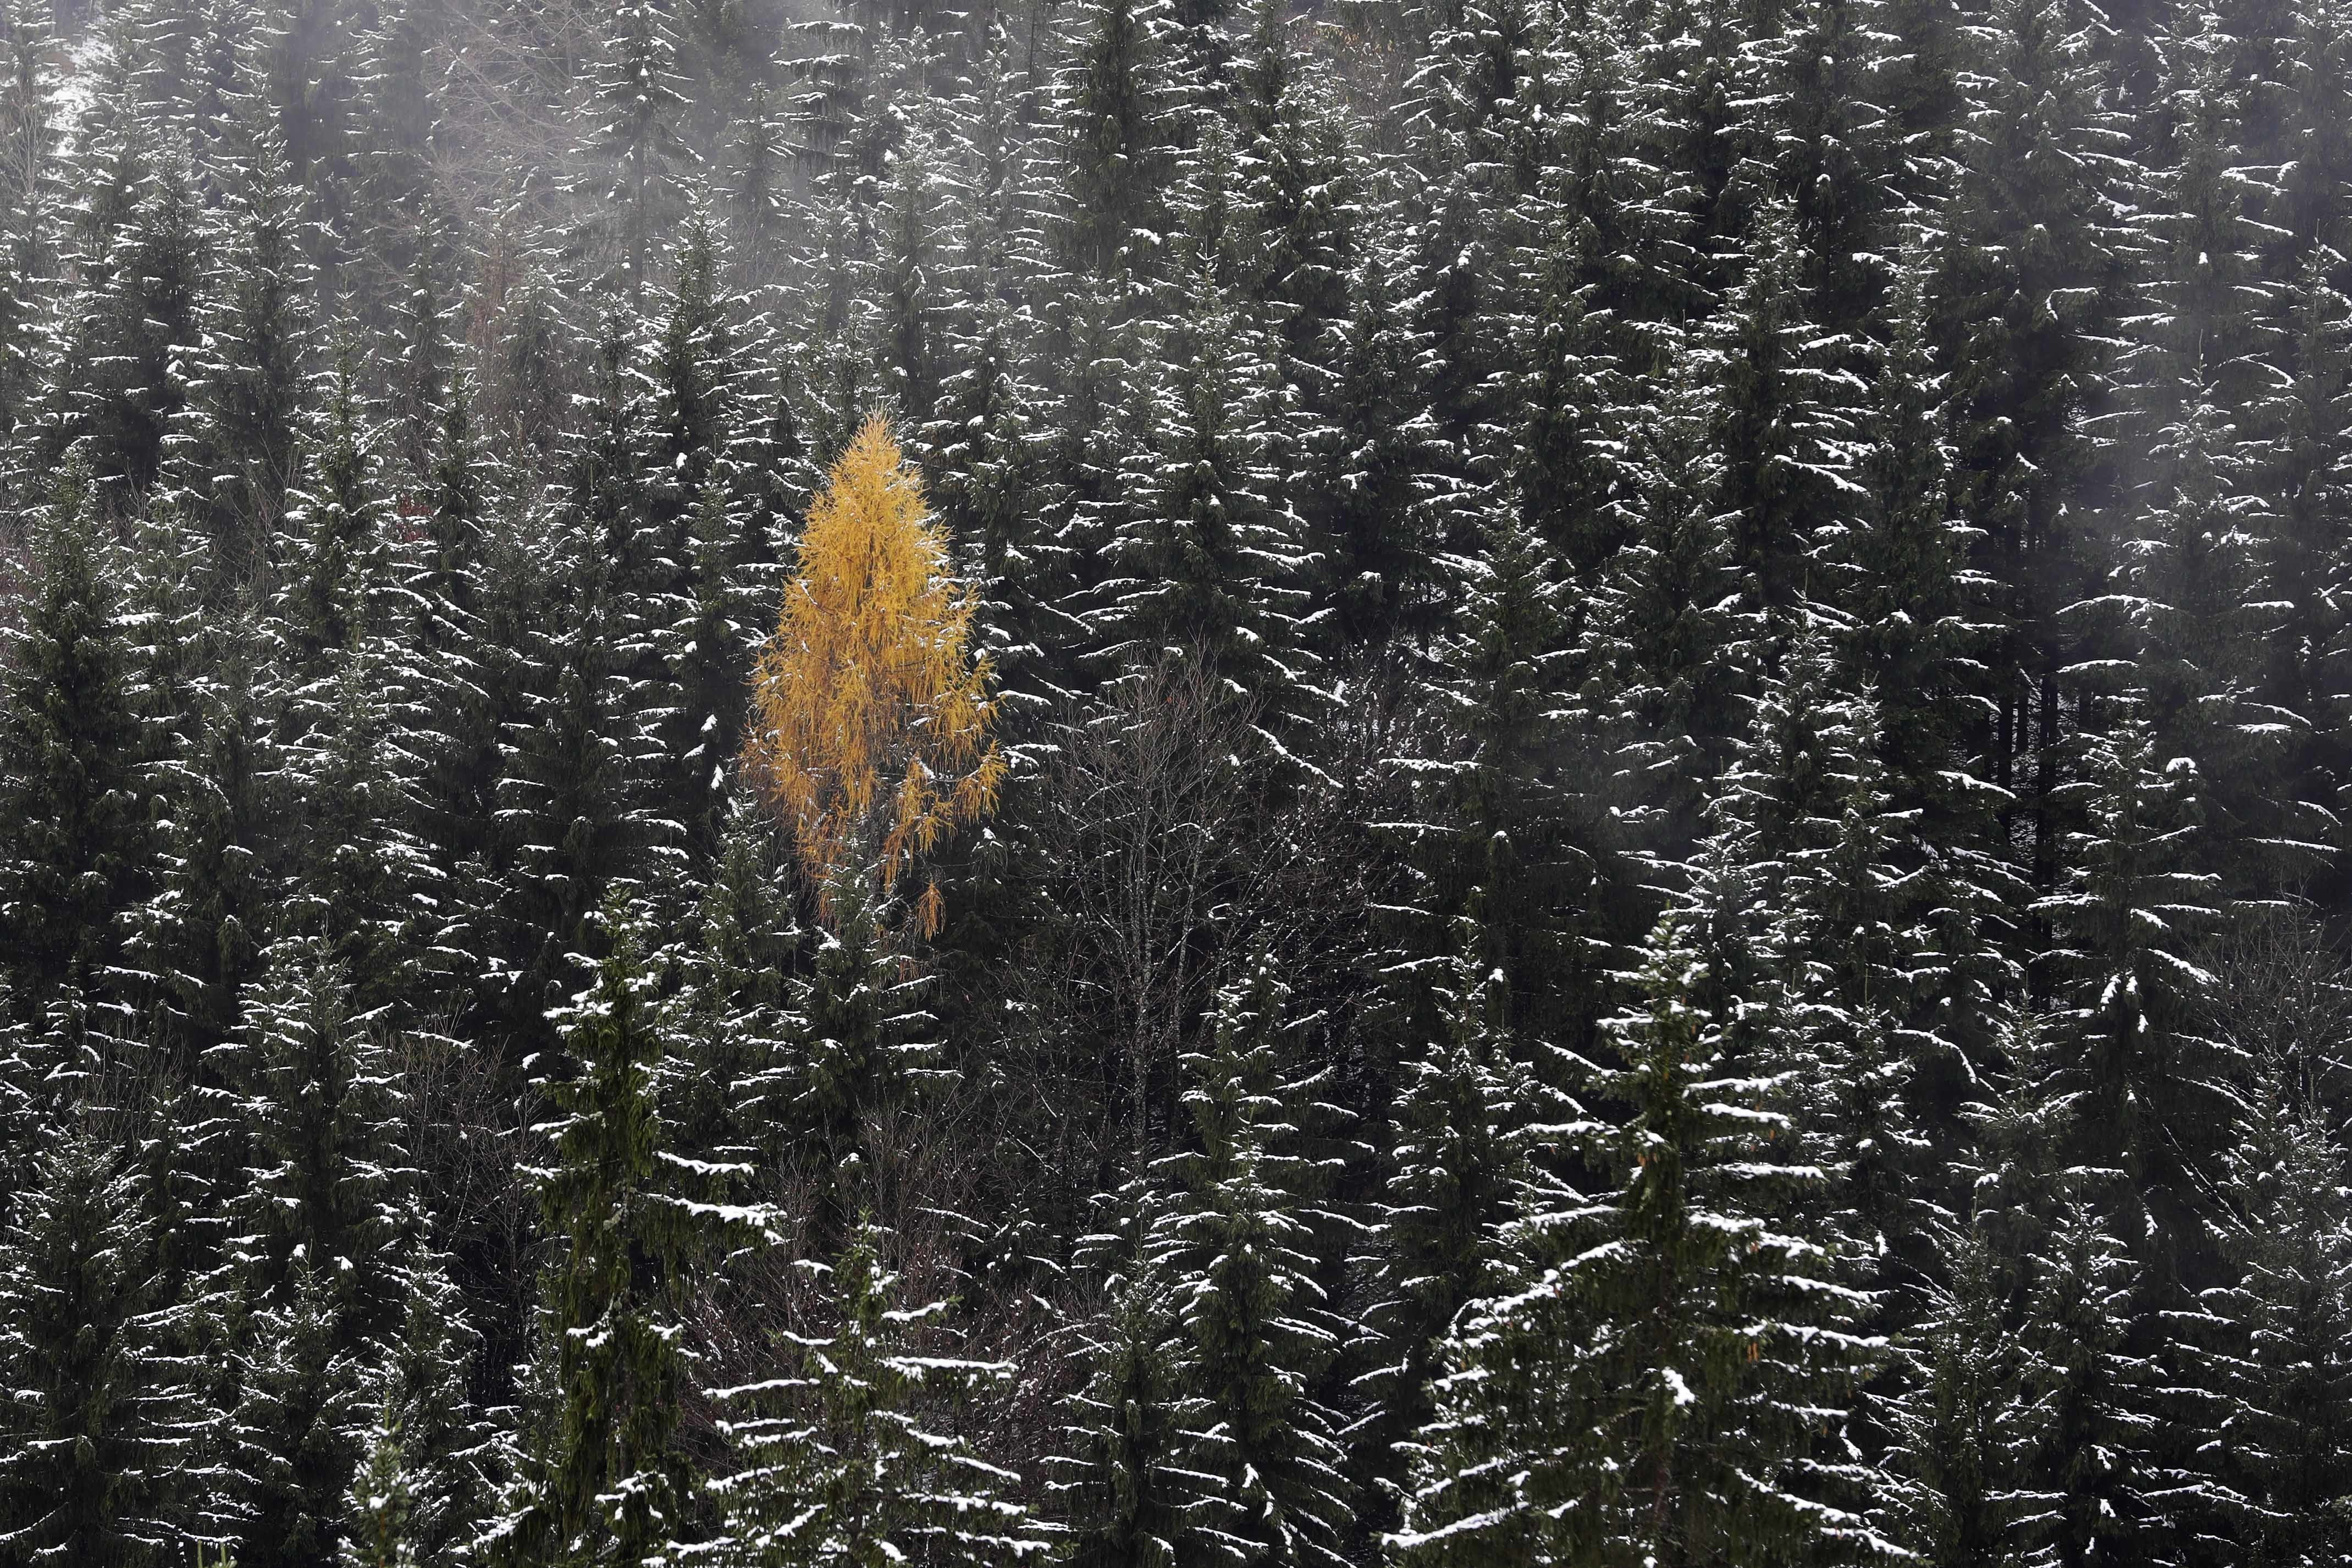 A golden larch in Bayrischzell, Germany.